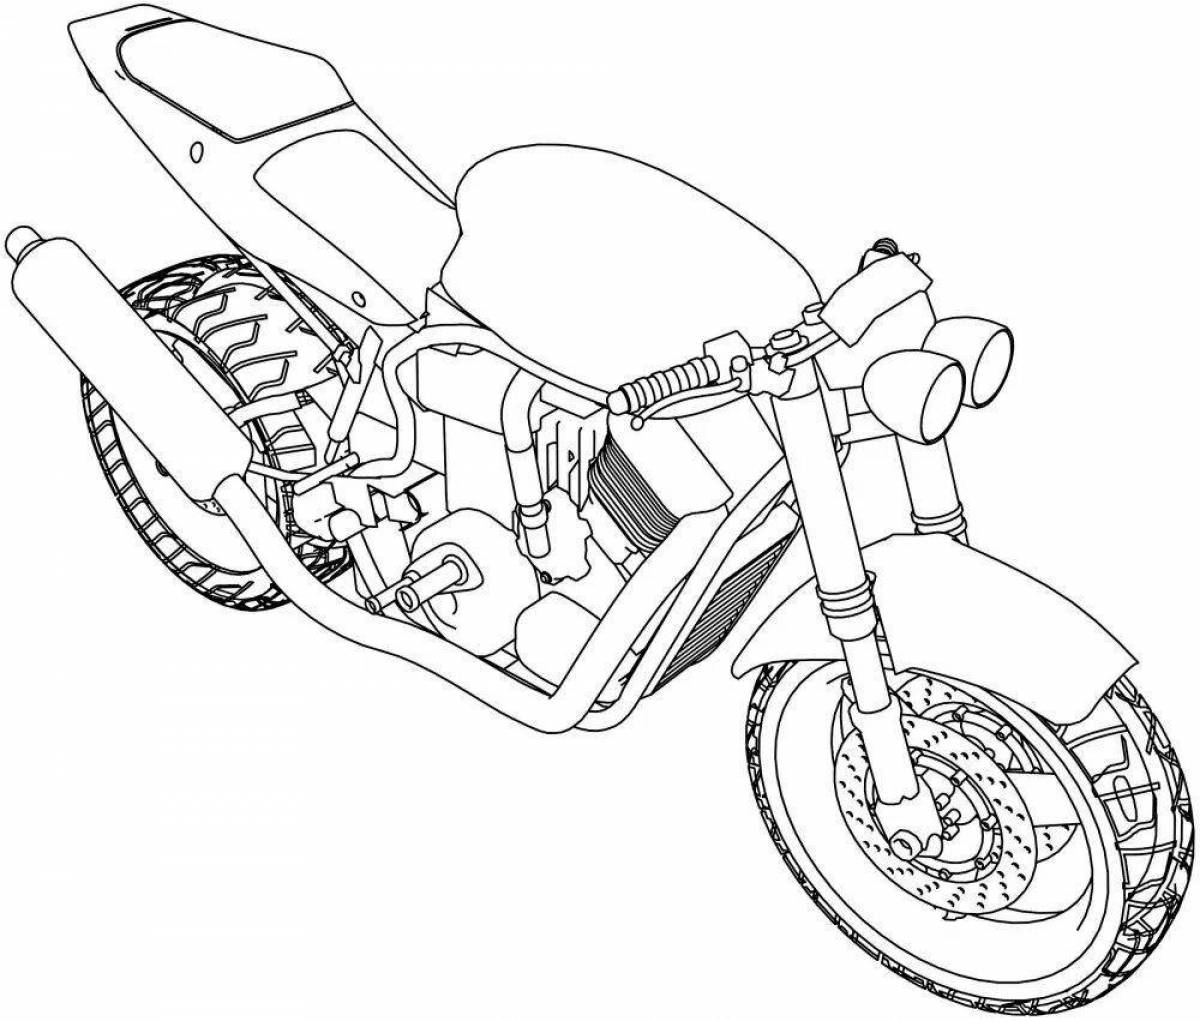 Nice motorcycle coloring book for kids